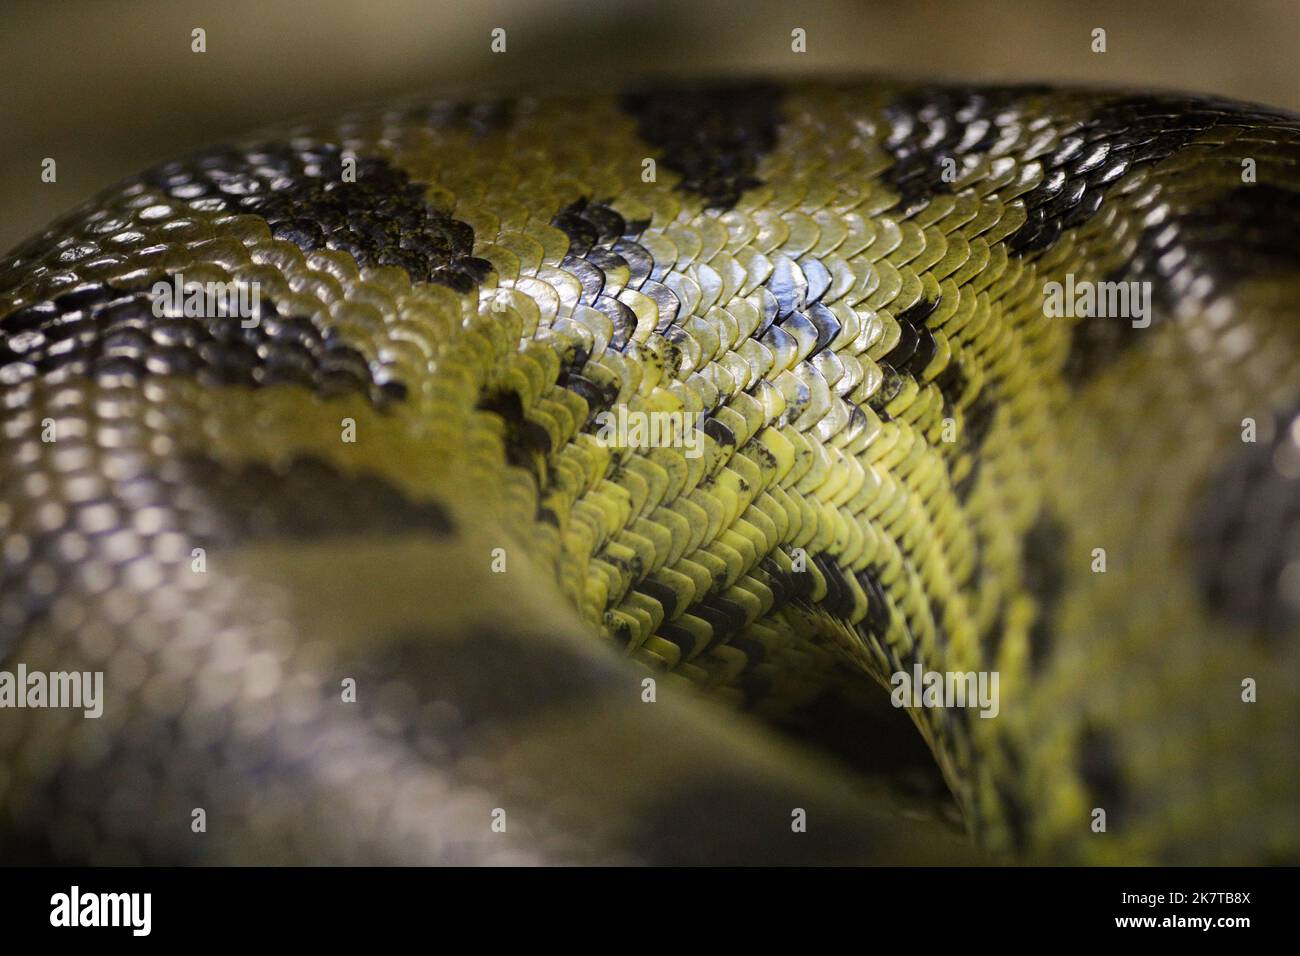 Shallow depth of field (selective focus) details with the scales of a boa constrictor snake. Stock Photo